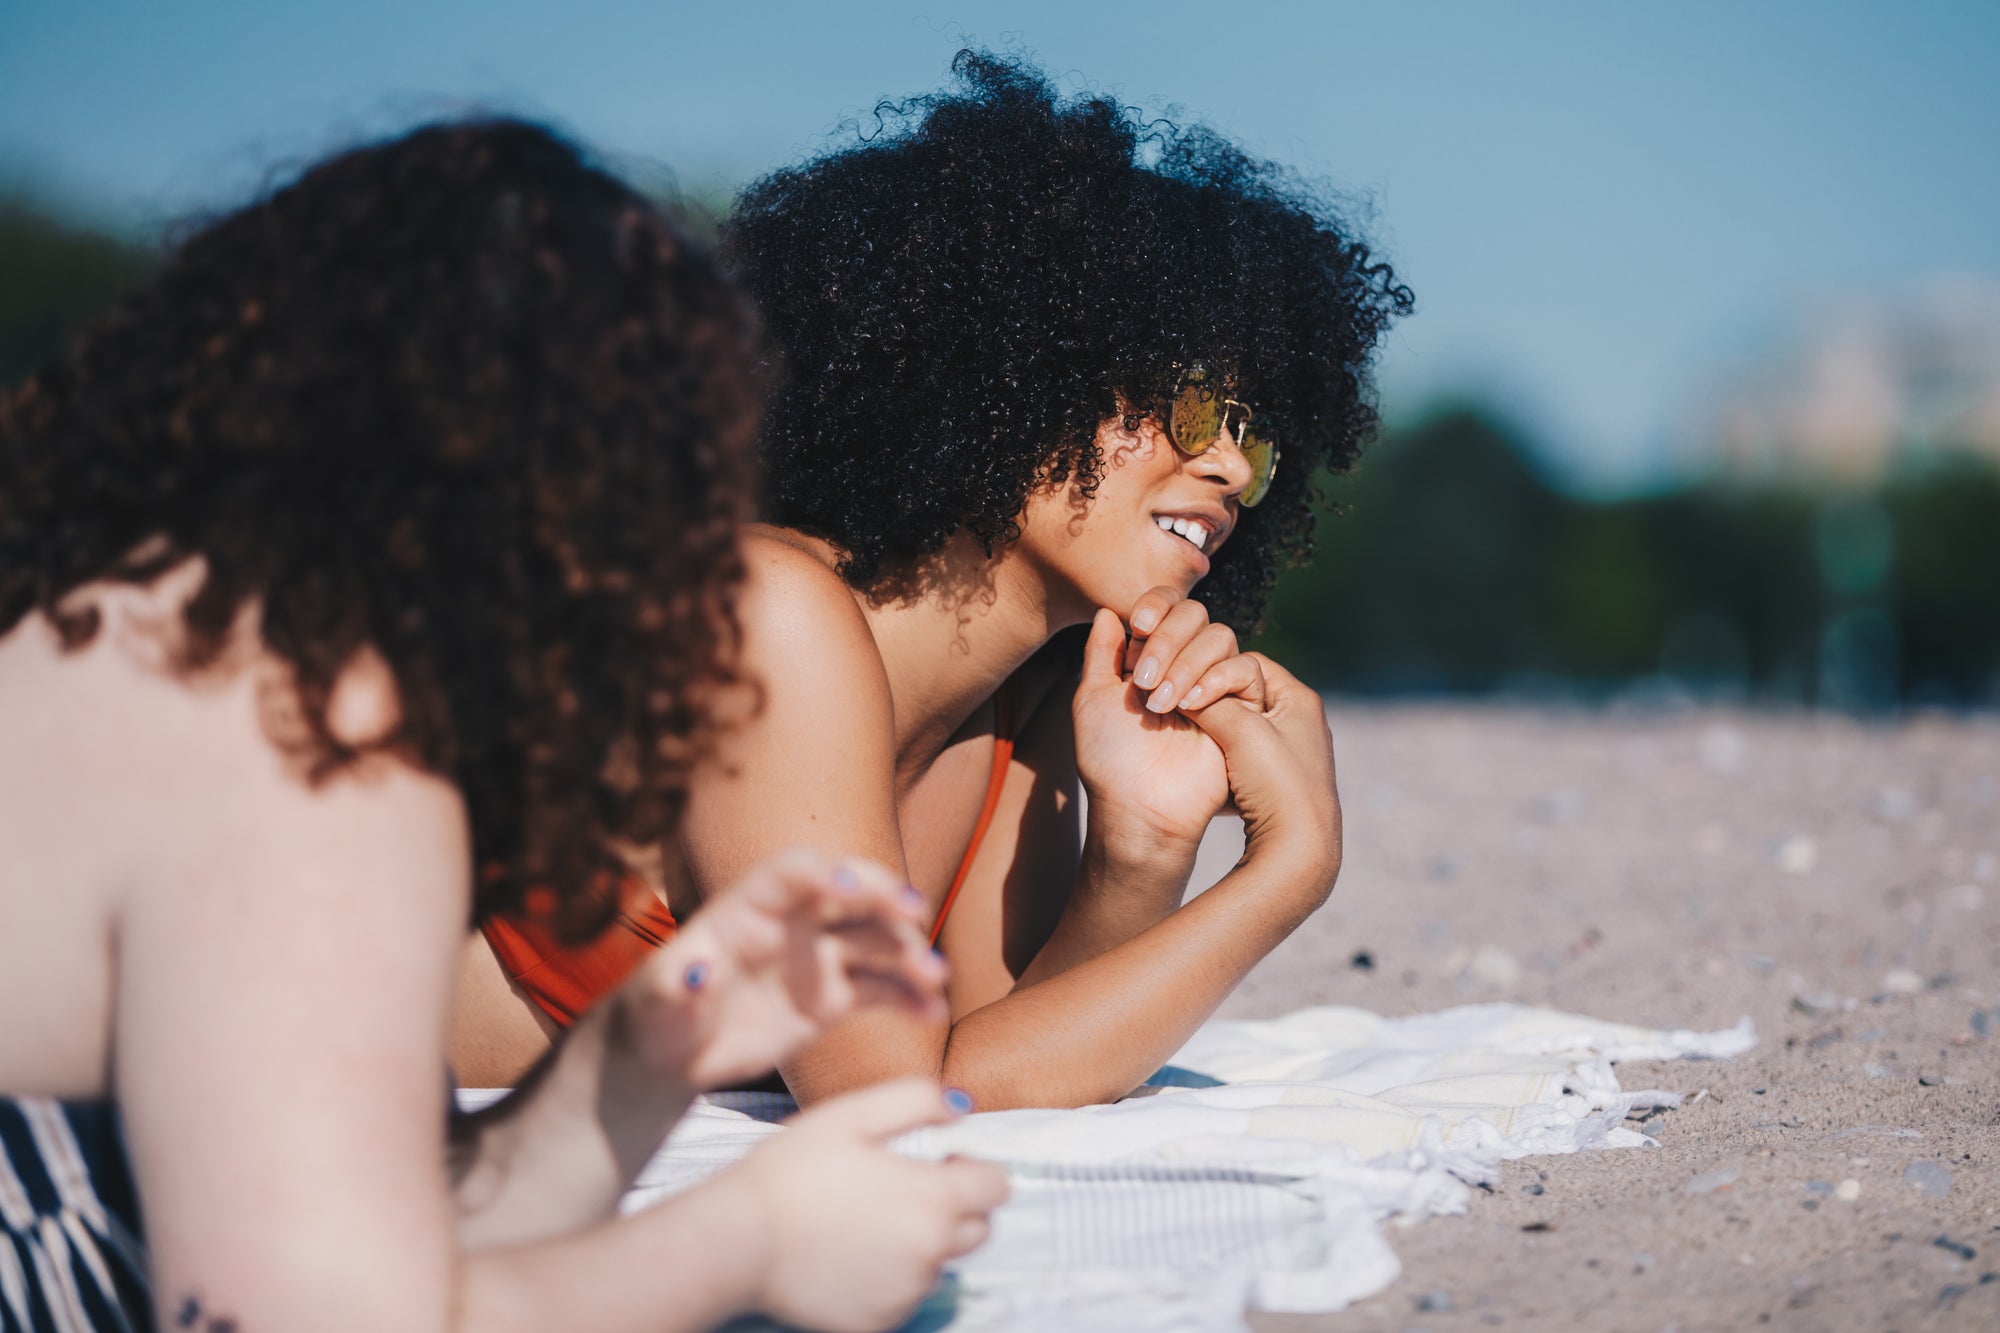 Two women with curly hair & sunglasses lying on a beach | Lava Cap microwavable conditioning cap nourishes curly hair that's prone to dryness